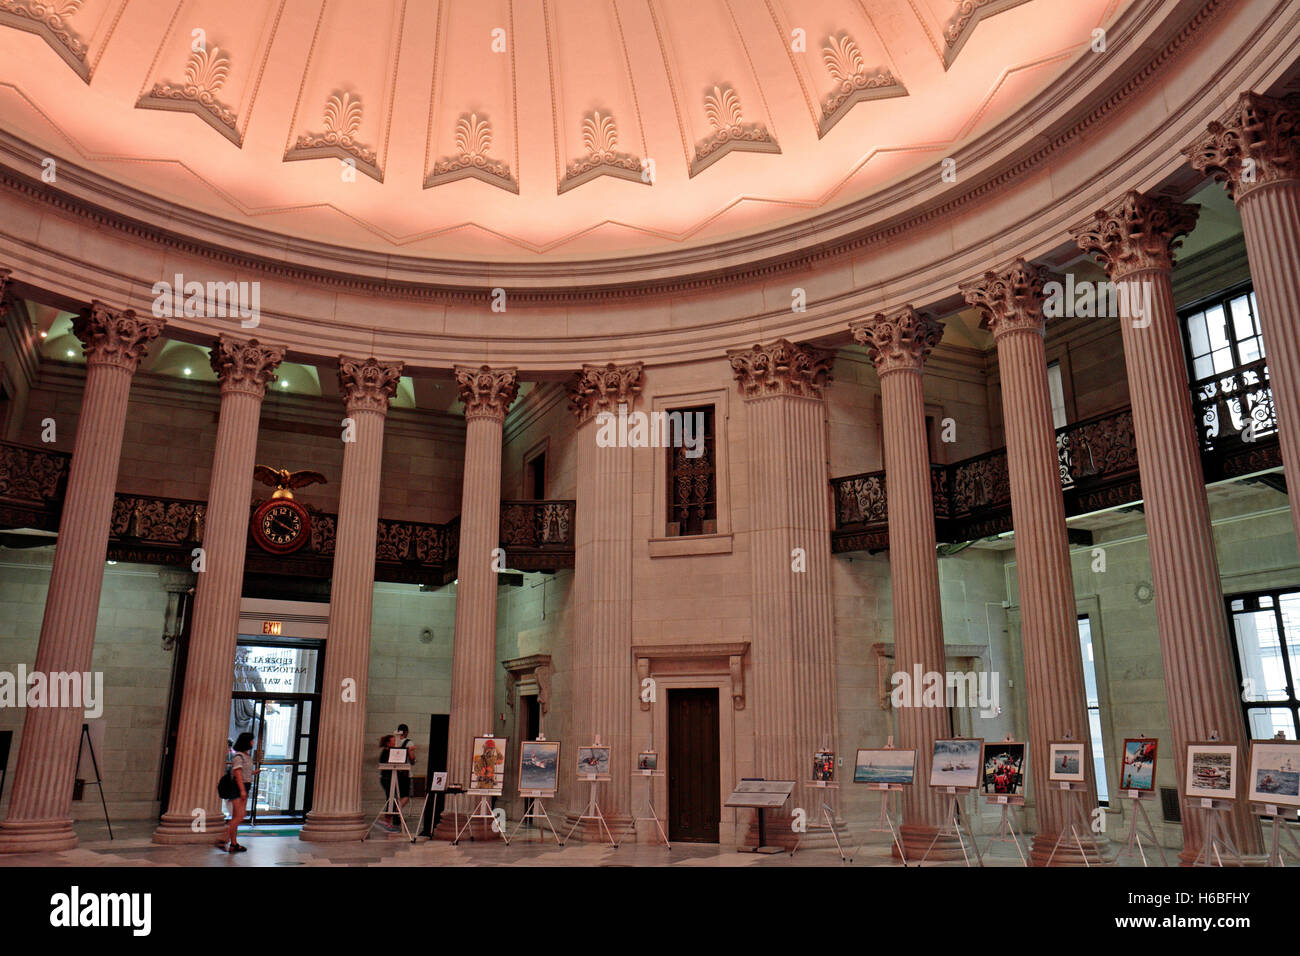 L'intérieur du Federal Hall National Memorial, Wall Street, Manhattan, New York, United States. Banque D'Images